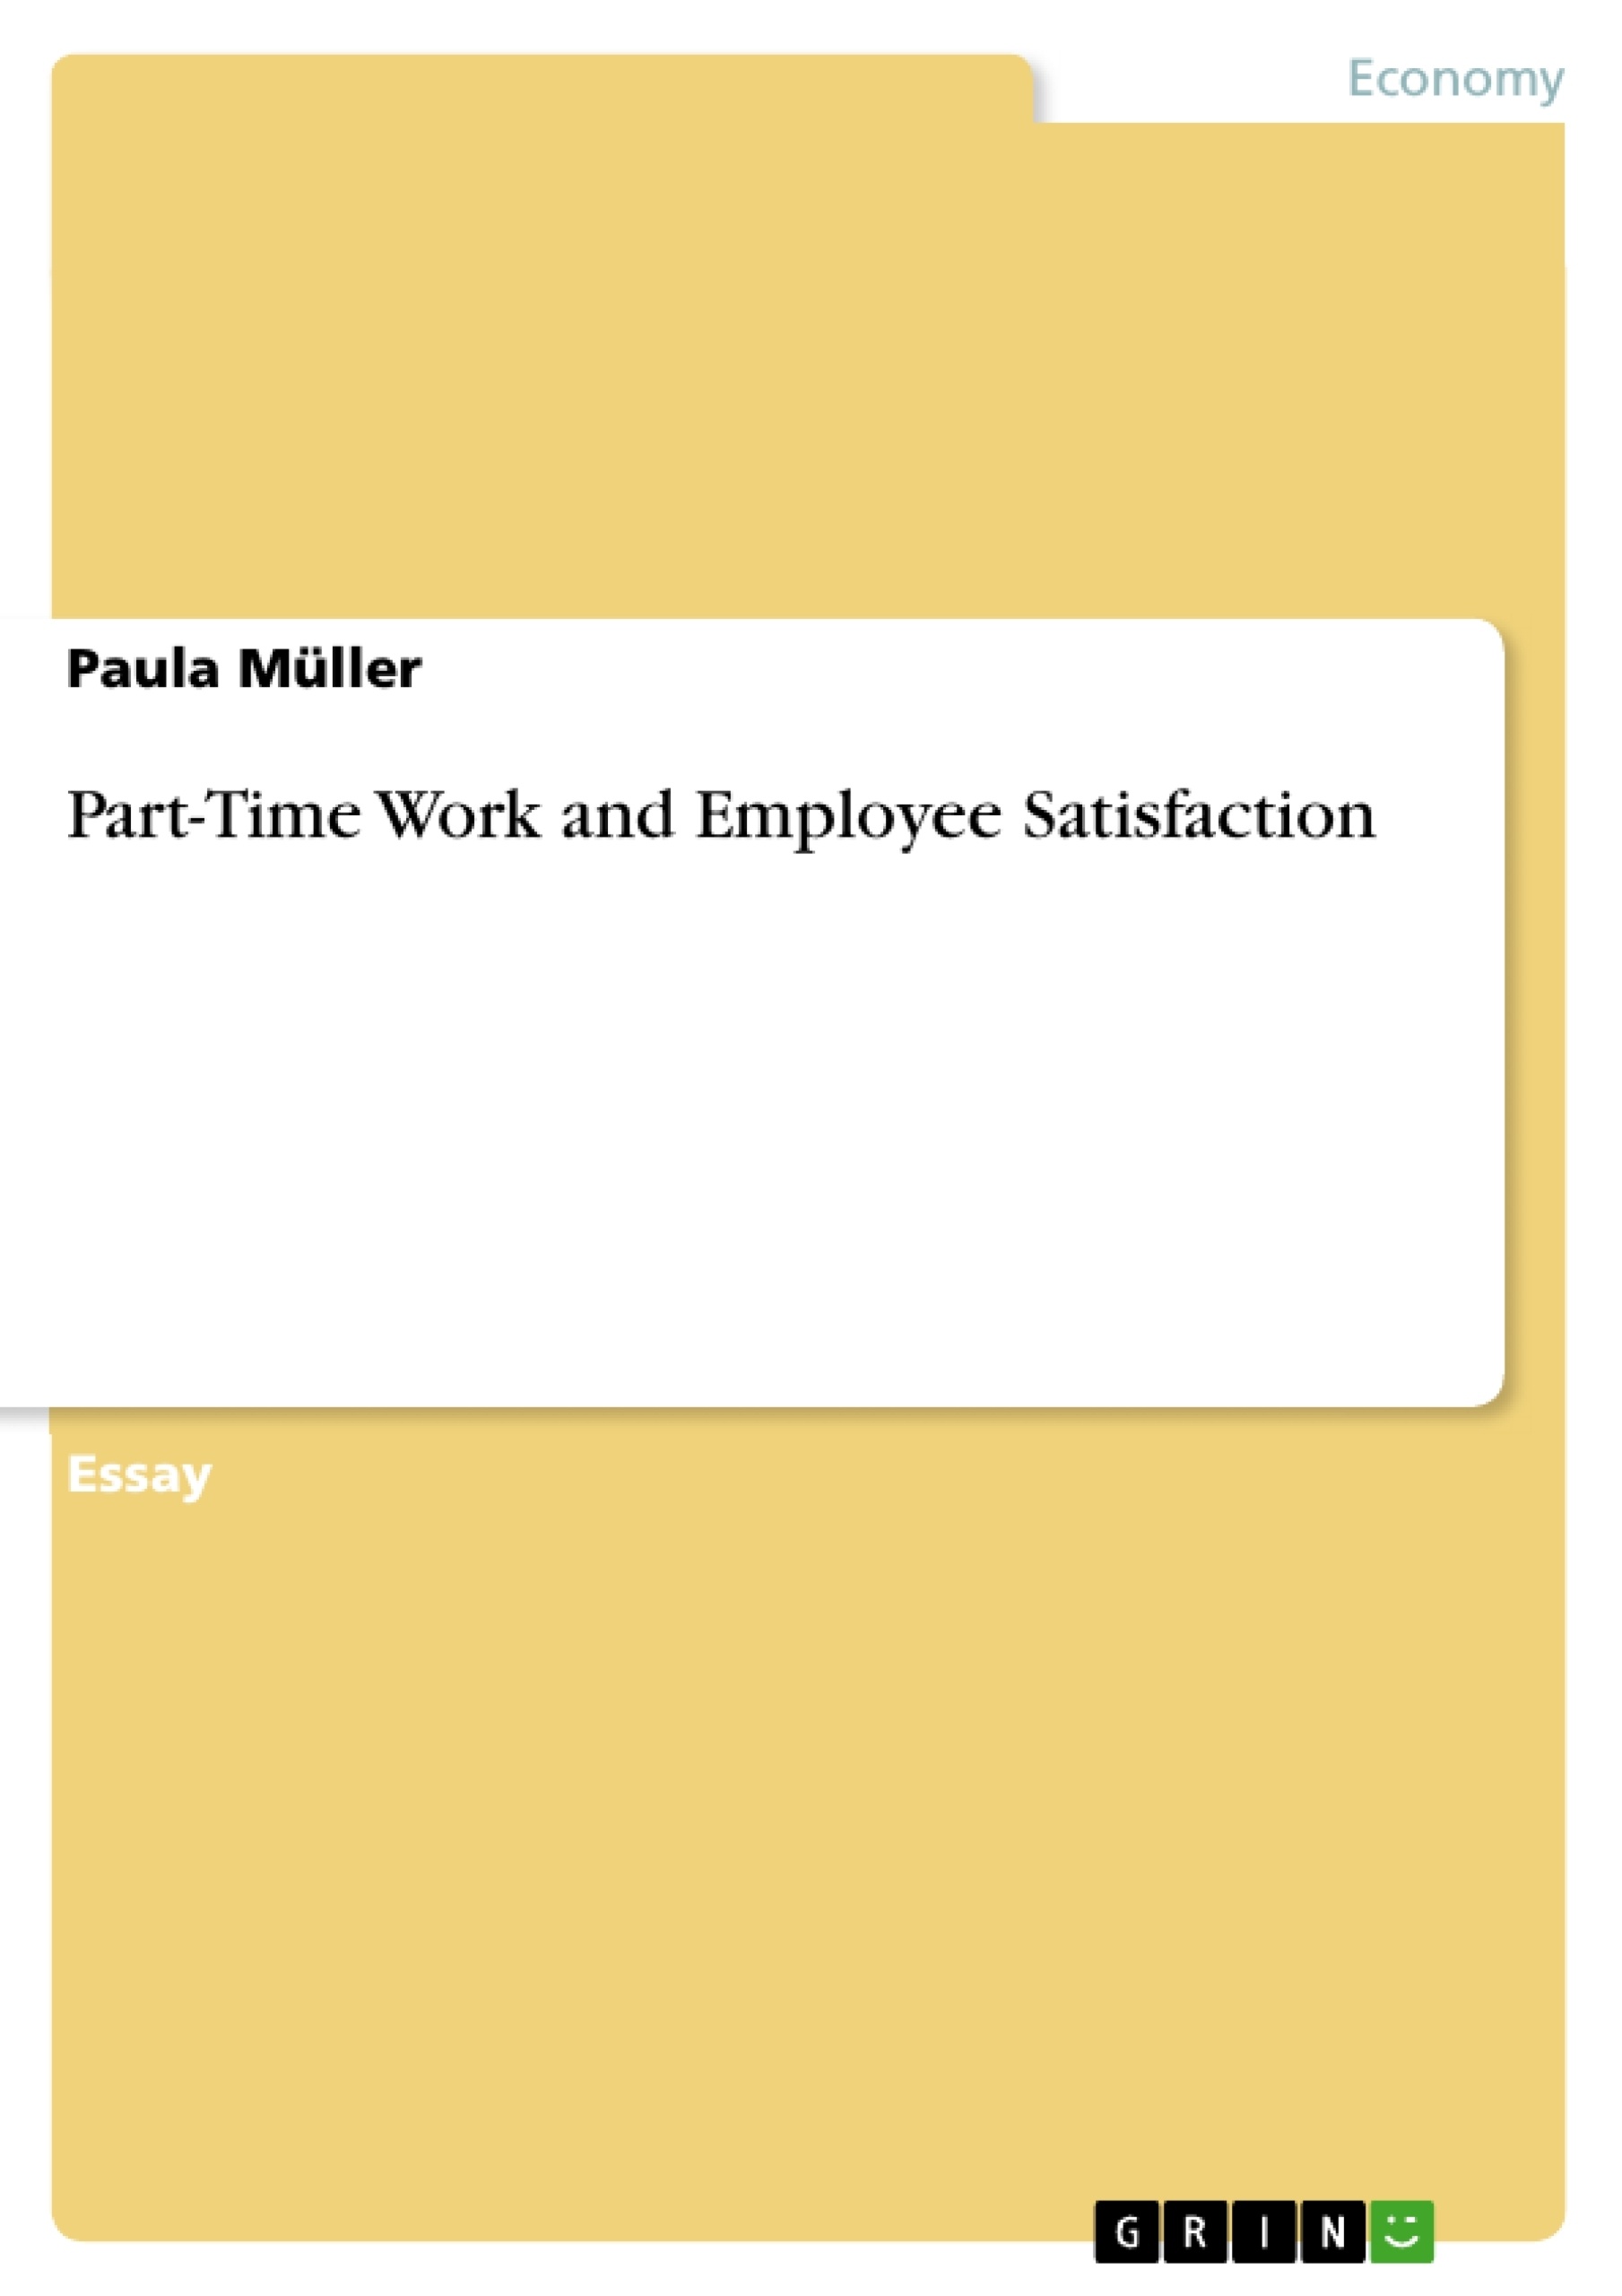 Title: Part-Time Work and Employee Satisfaction